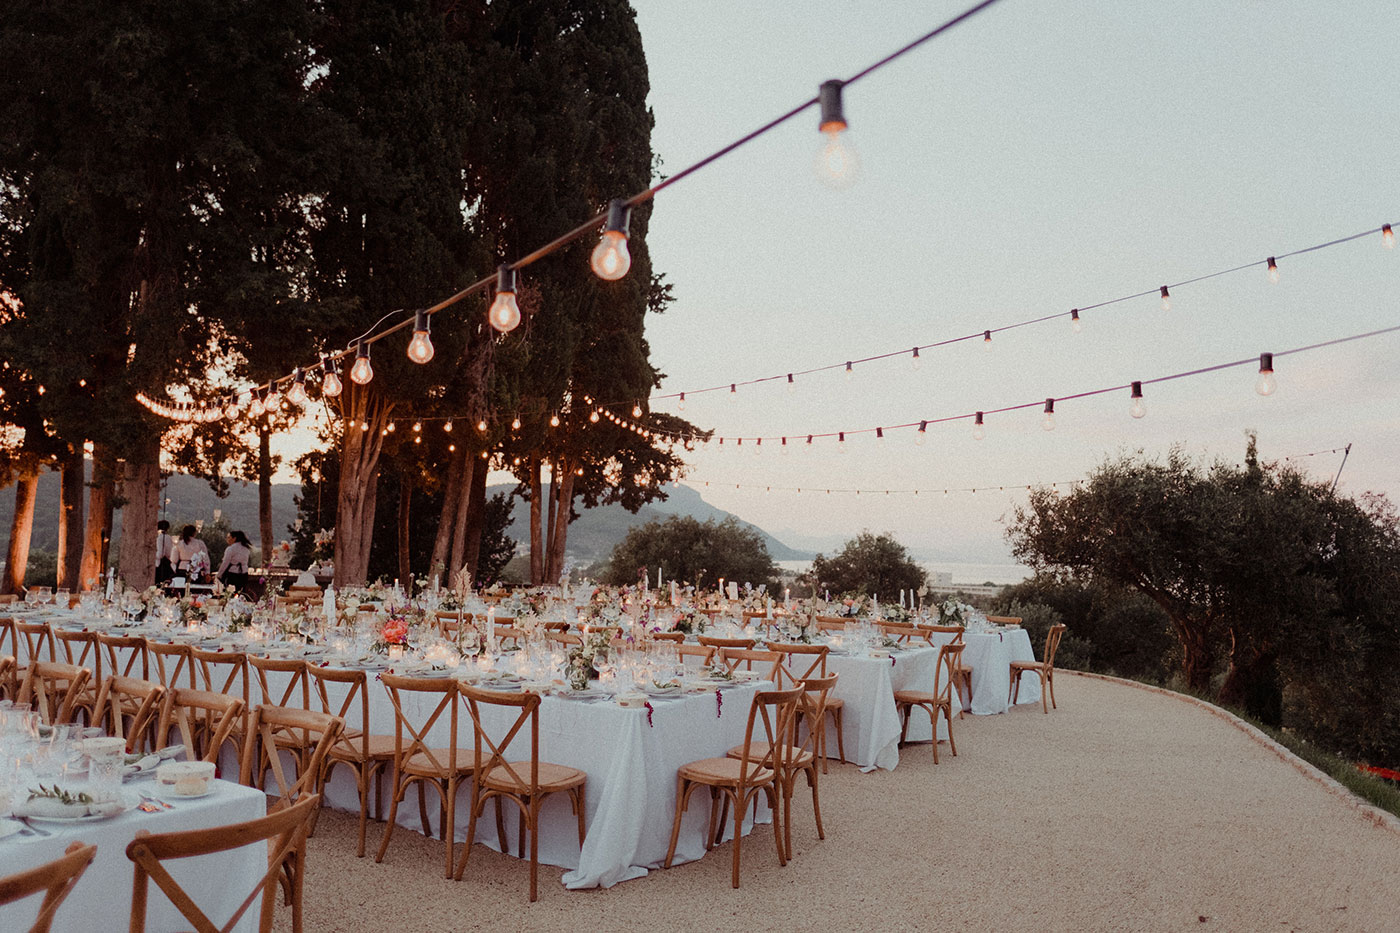 Venue <a href="https://wedinspire.com/wedding-venues/corfu/the-courti-estate/" target="_blank" rel="noopener noreferrer">The Courti Estate</a> | Photo by <a href="https://beneathepines.com/" target="_blank" rel="noopener noreferrer">Chris Parkinson</a>